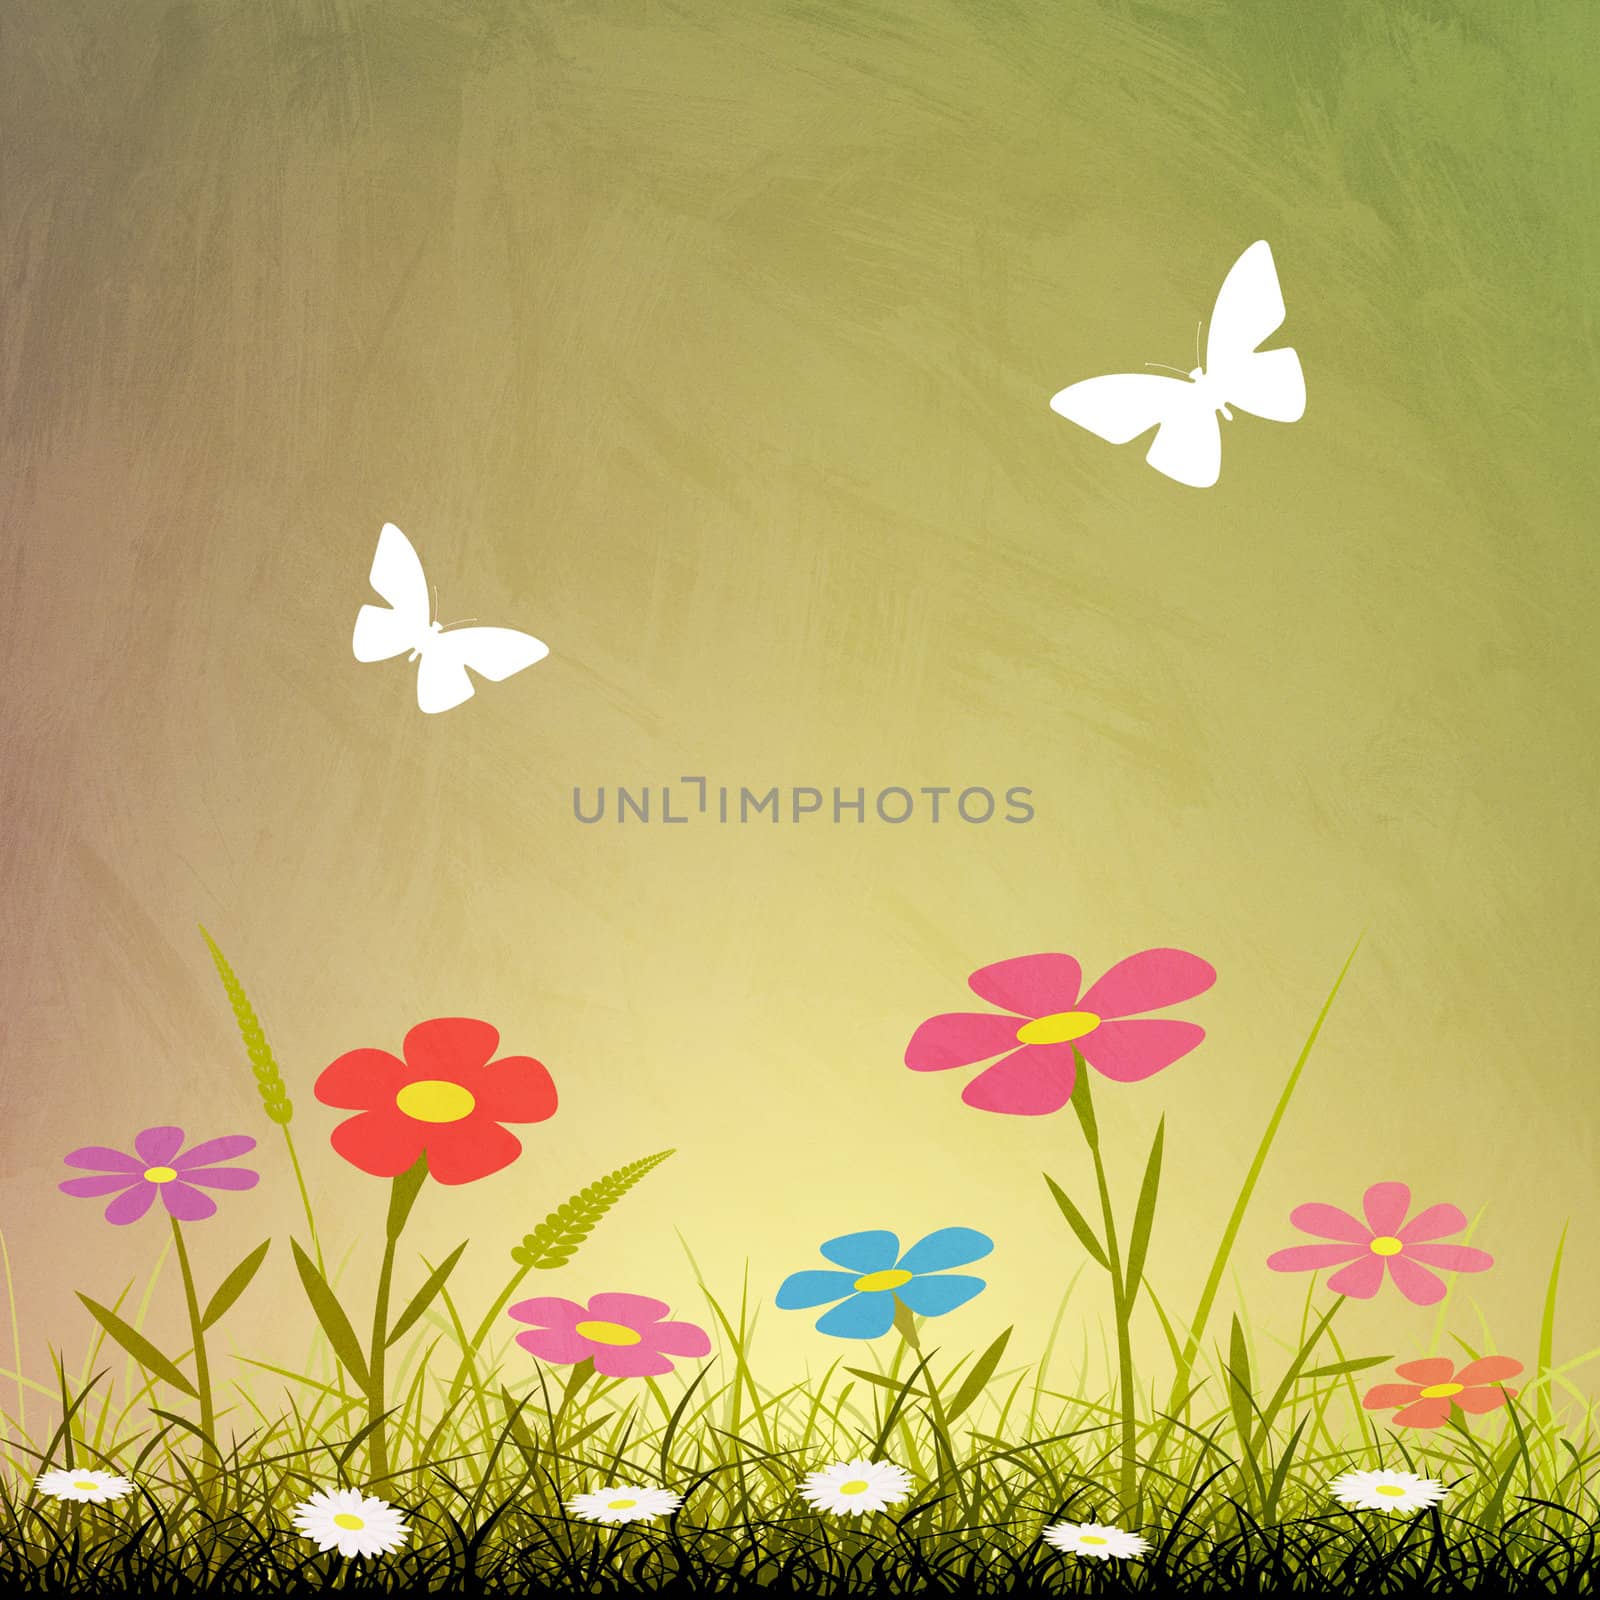 A Simple Grunge Background with Flowers